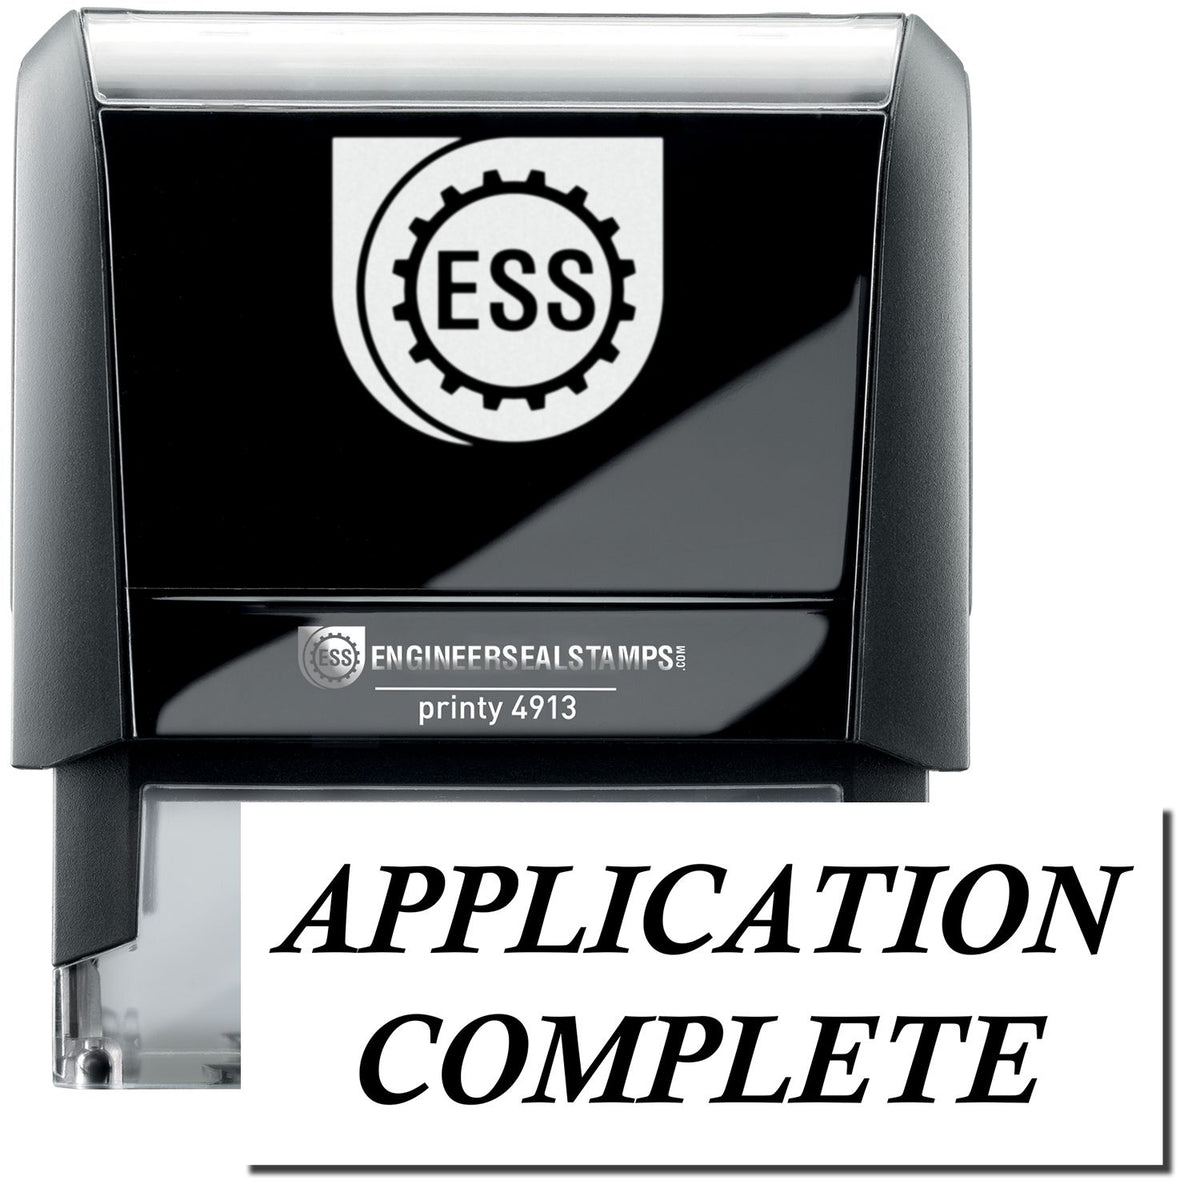 A self-inking stamp with a stamped image showing how the text &quot;APPLICATION COMPLETE&quot; in a large italic bold font is displayed by it.